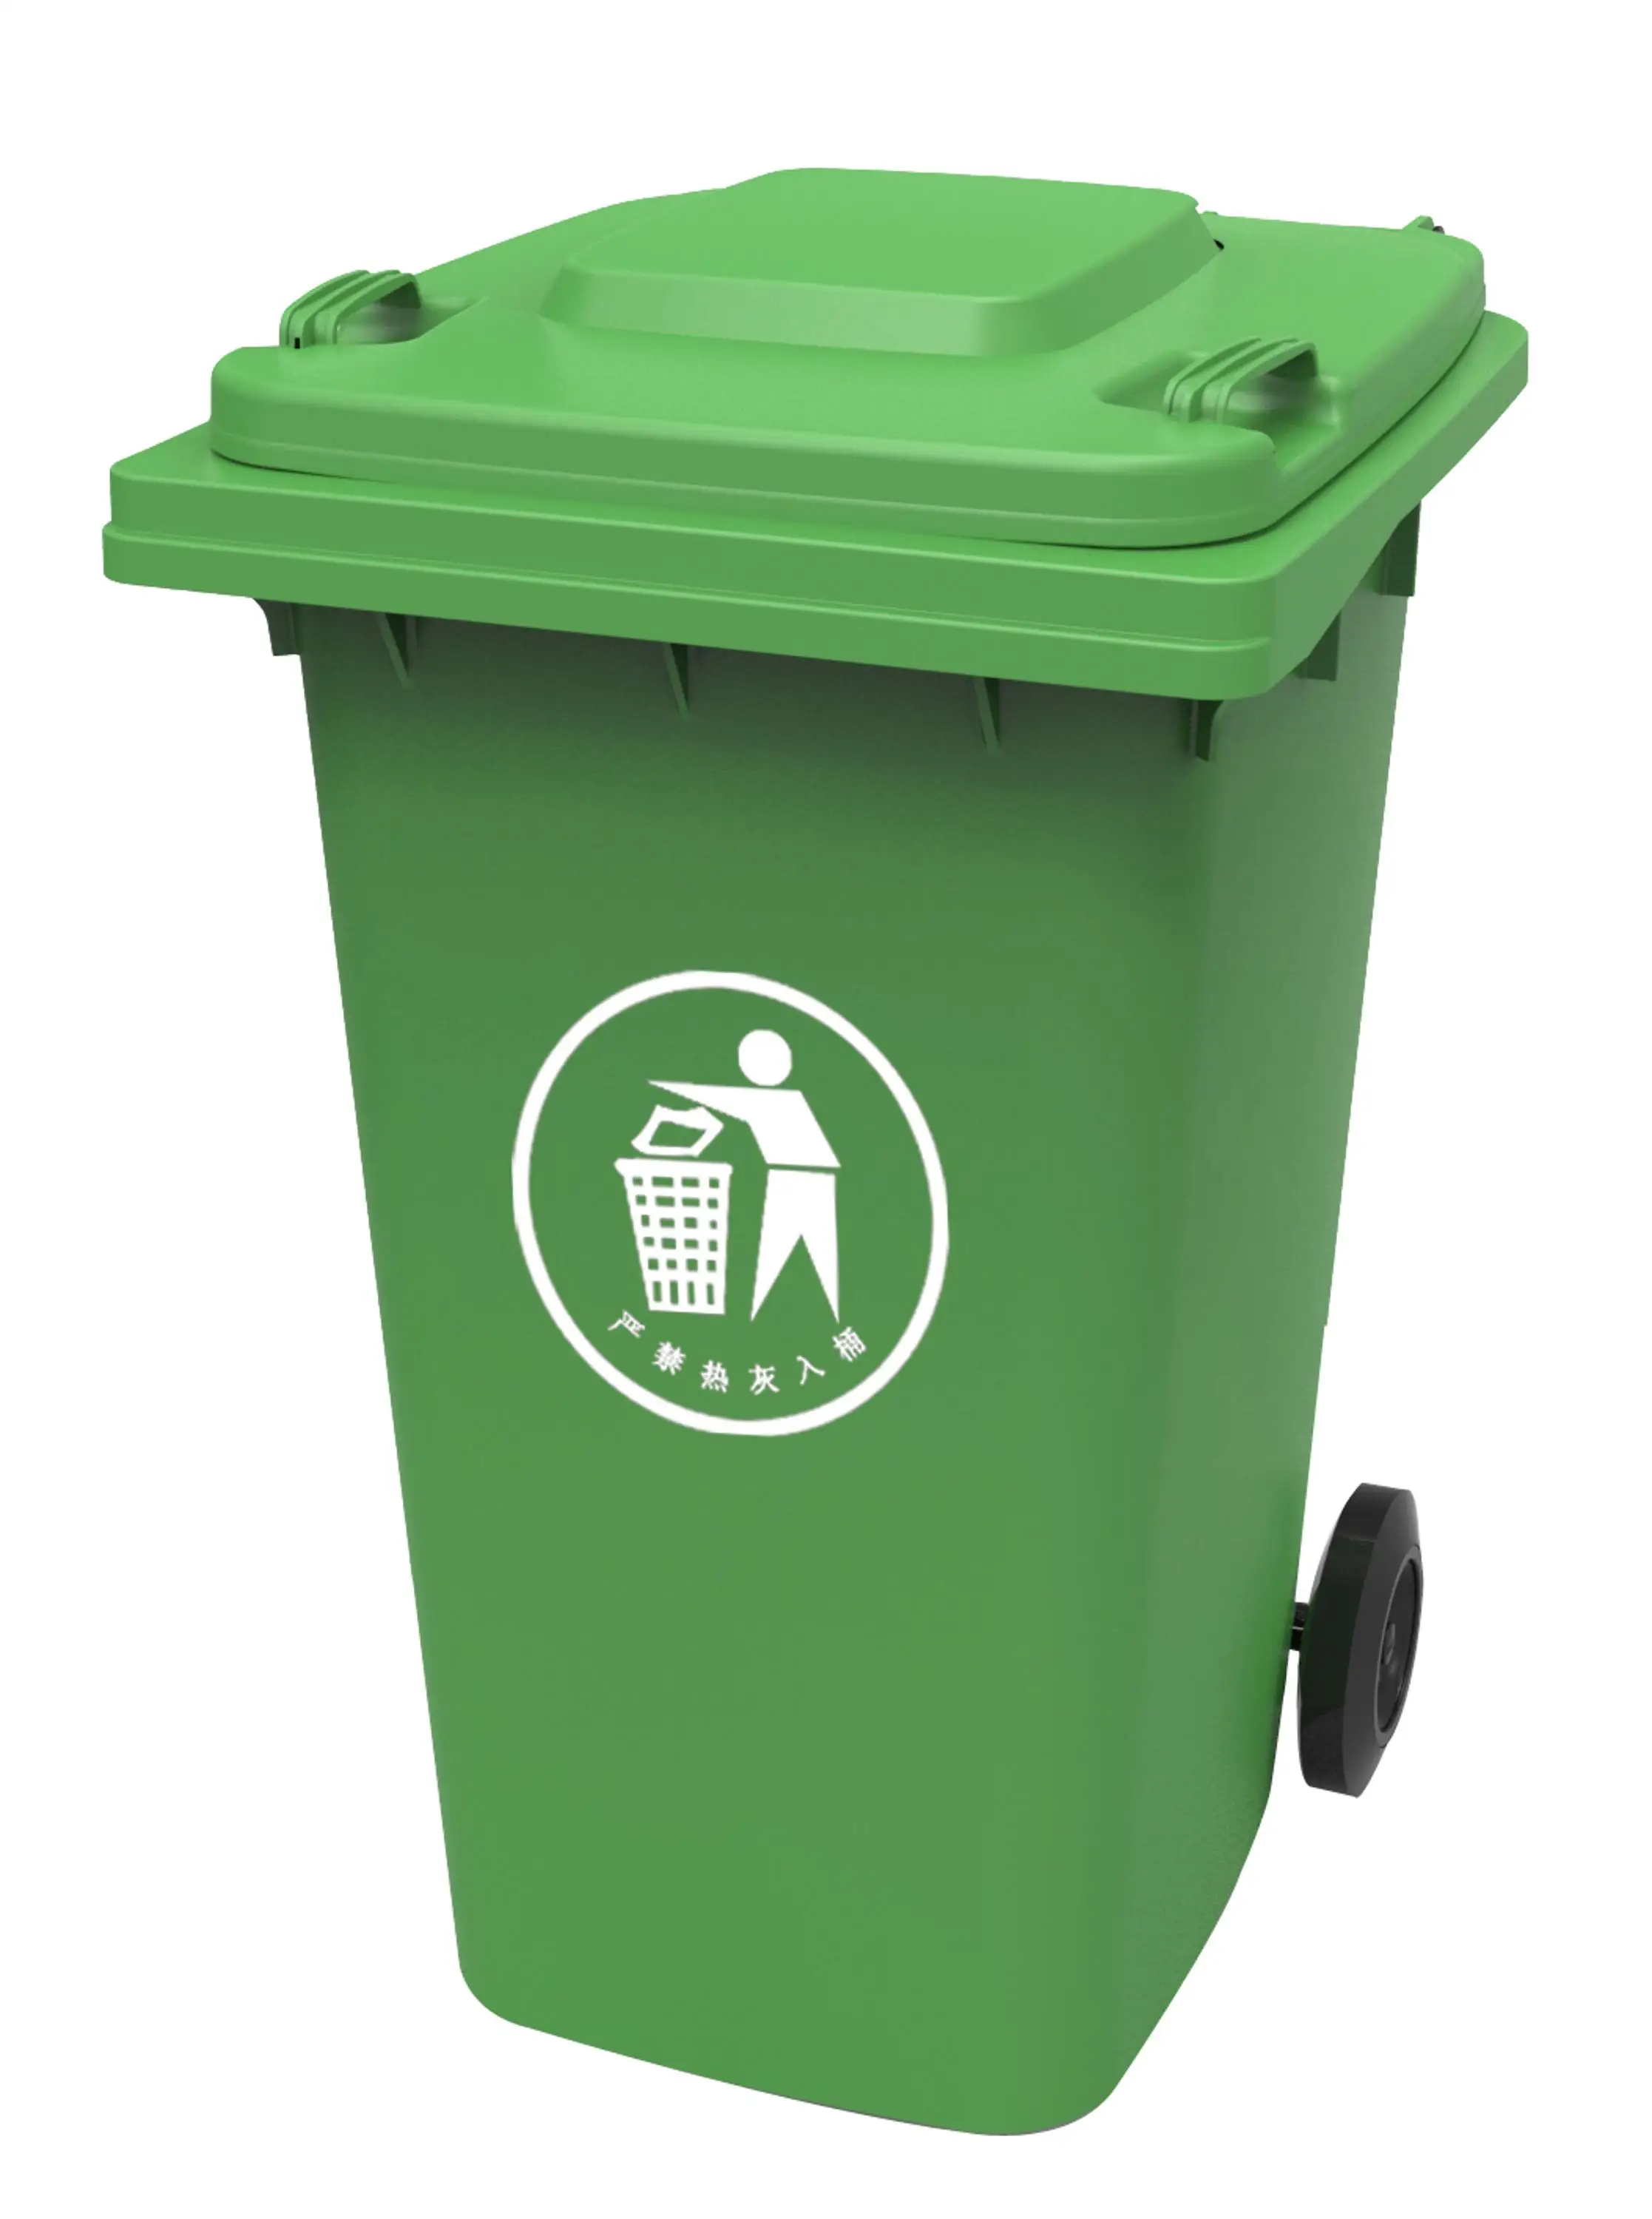 download recycling trash can